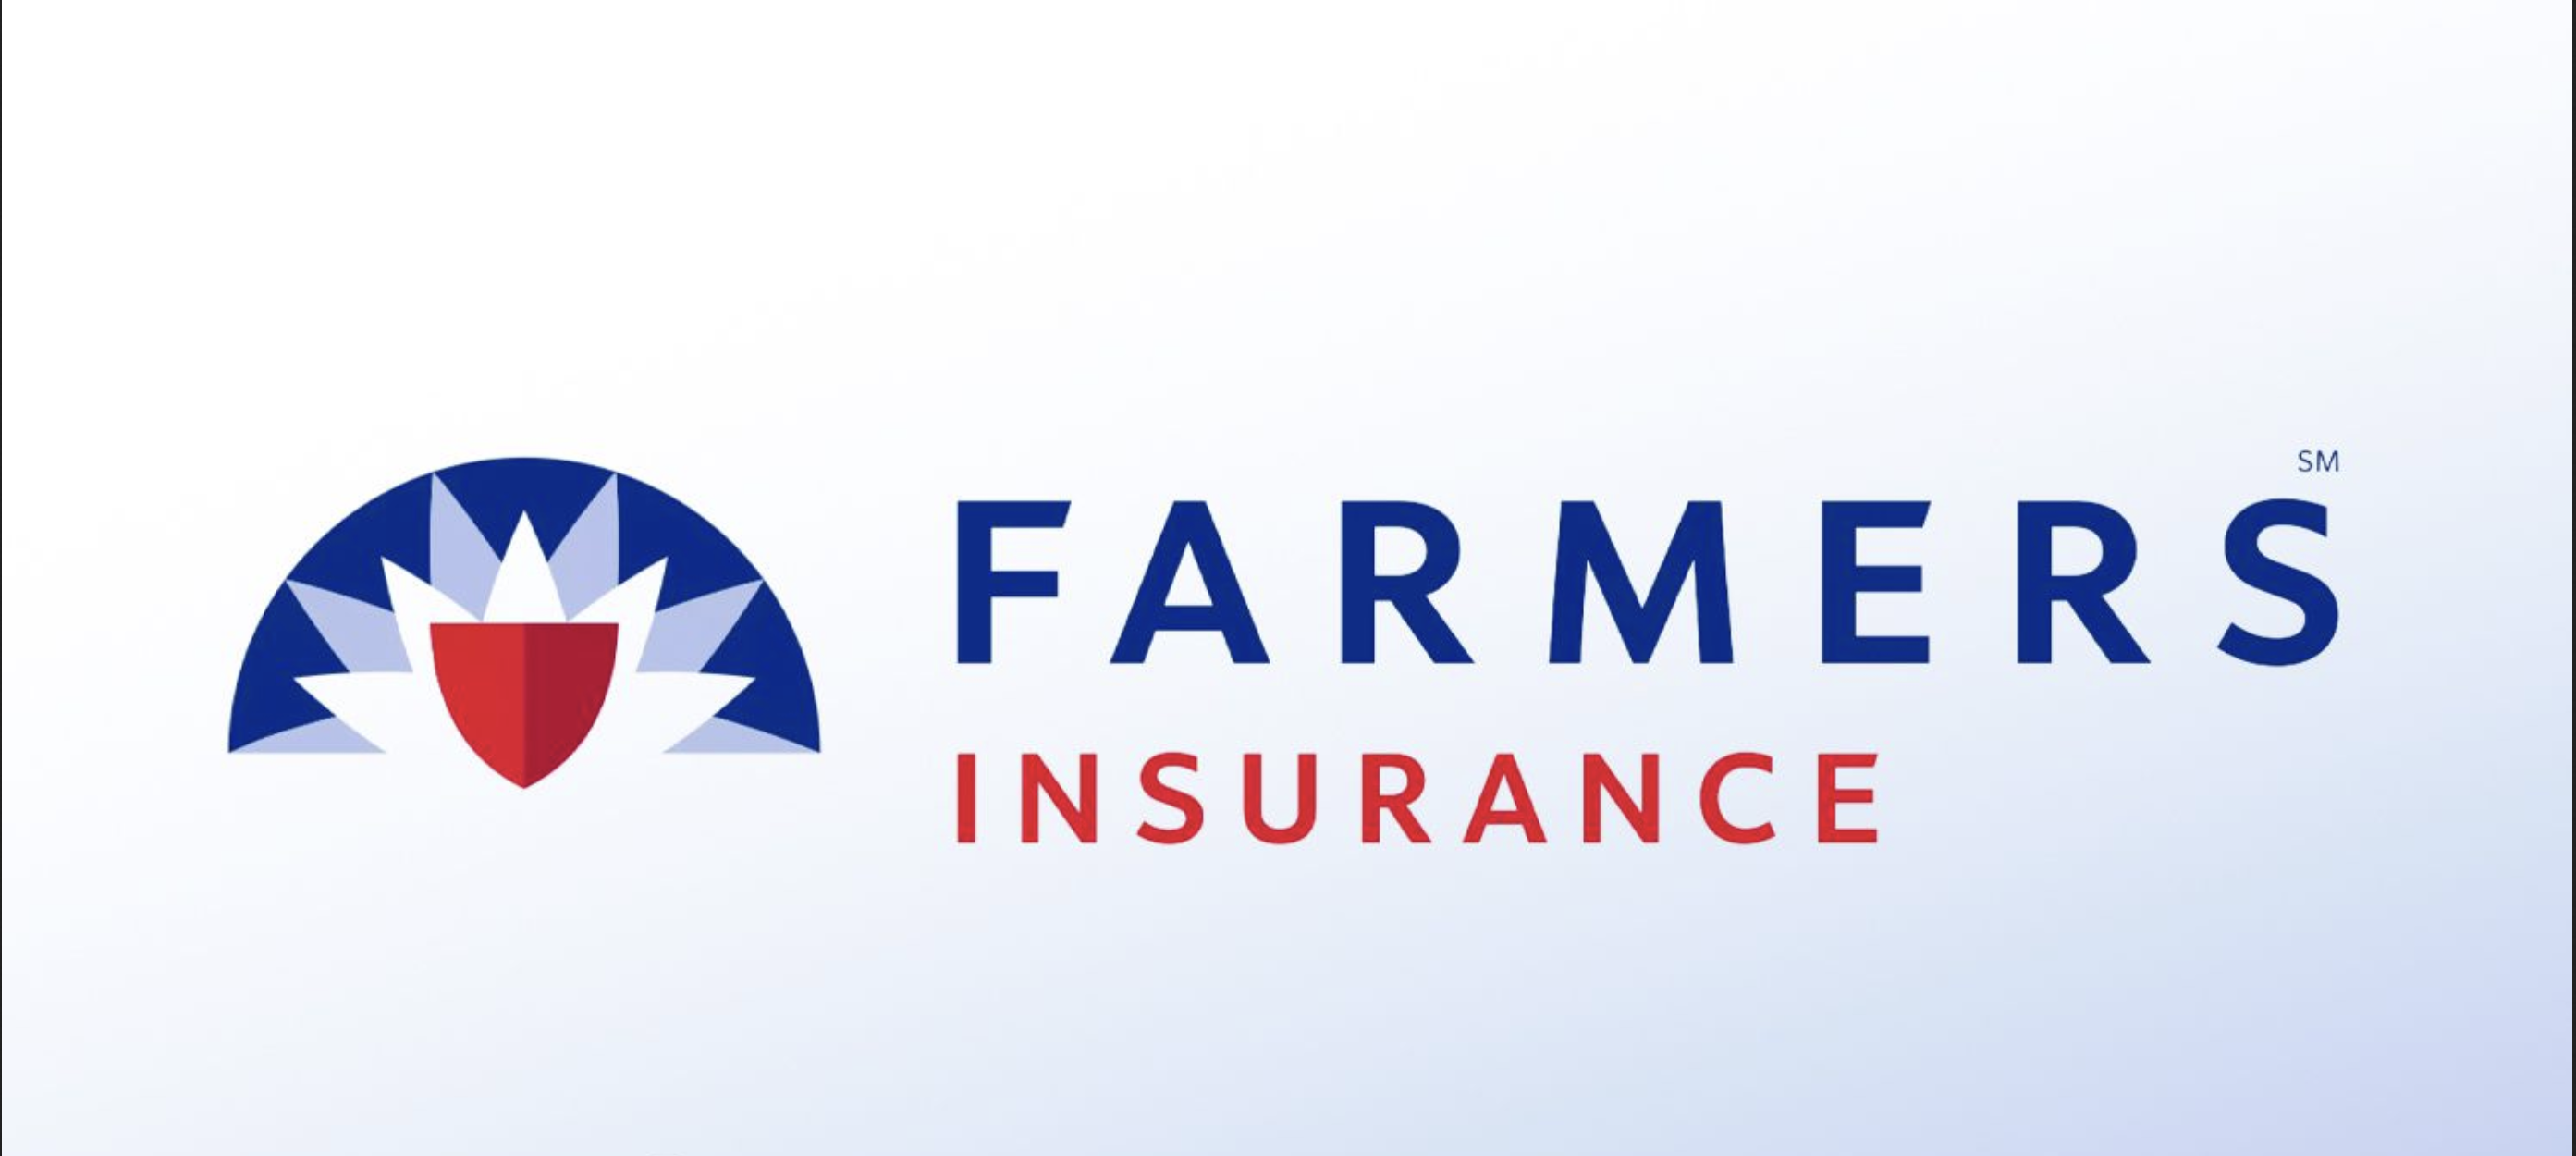 Farmers Insurance Lays Off 2,400 Employees, Citing Macroeconomic